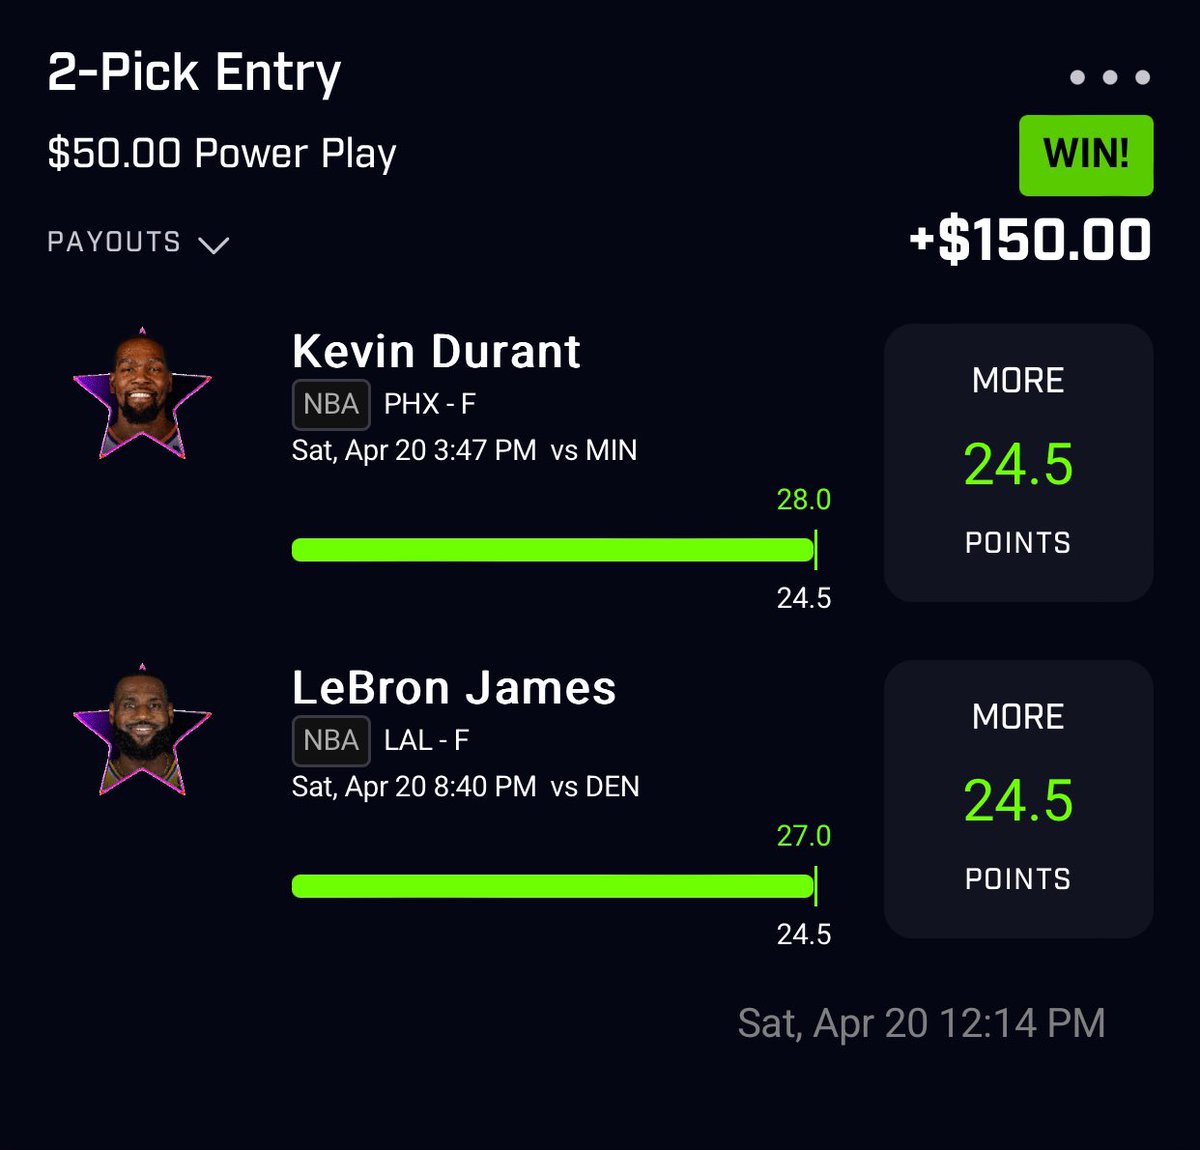 Even if their teams come up short I know who’s ALWAYS gonna show up in the Playoffs! EASY MONEY on @PrizePicks! Use my code 'JOEKNOWS' to double your first deposit up to $100! #prizepickspartner prizepicks.onelink.me/ivHR/JoeKnows